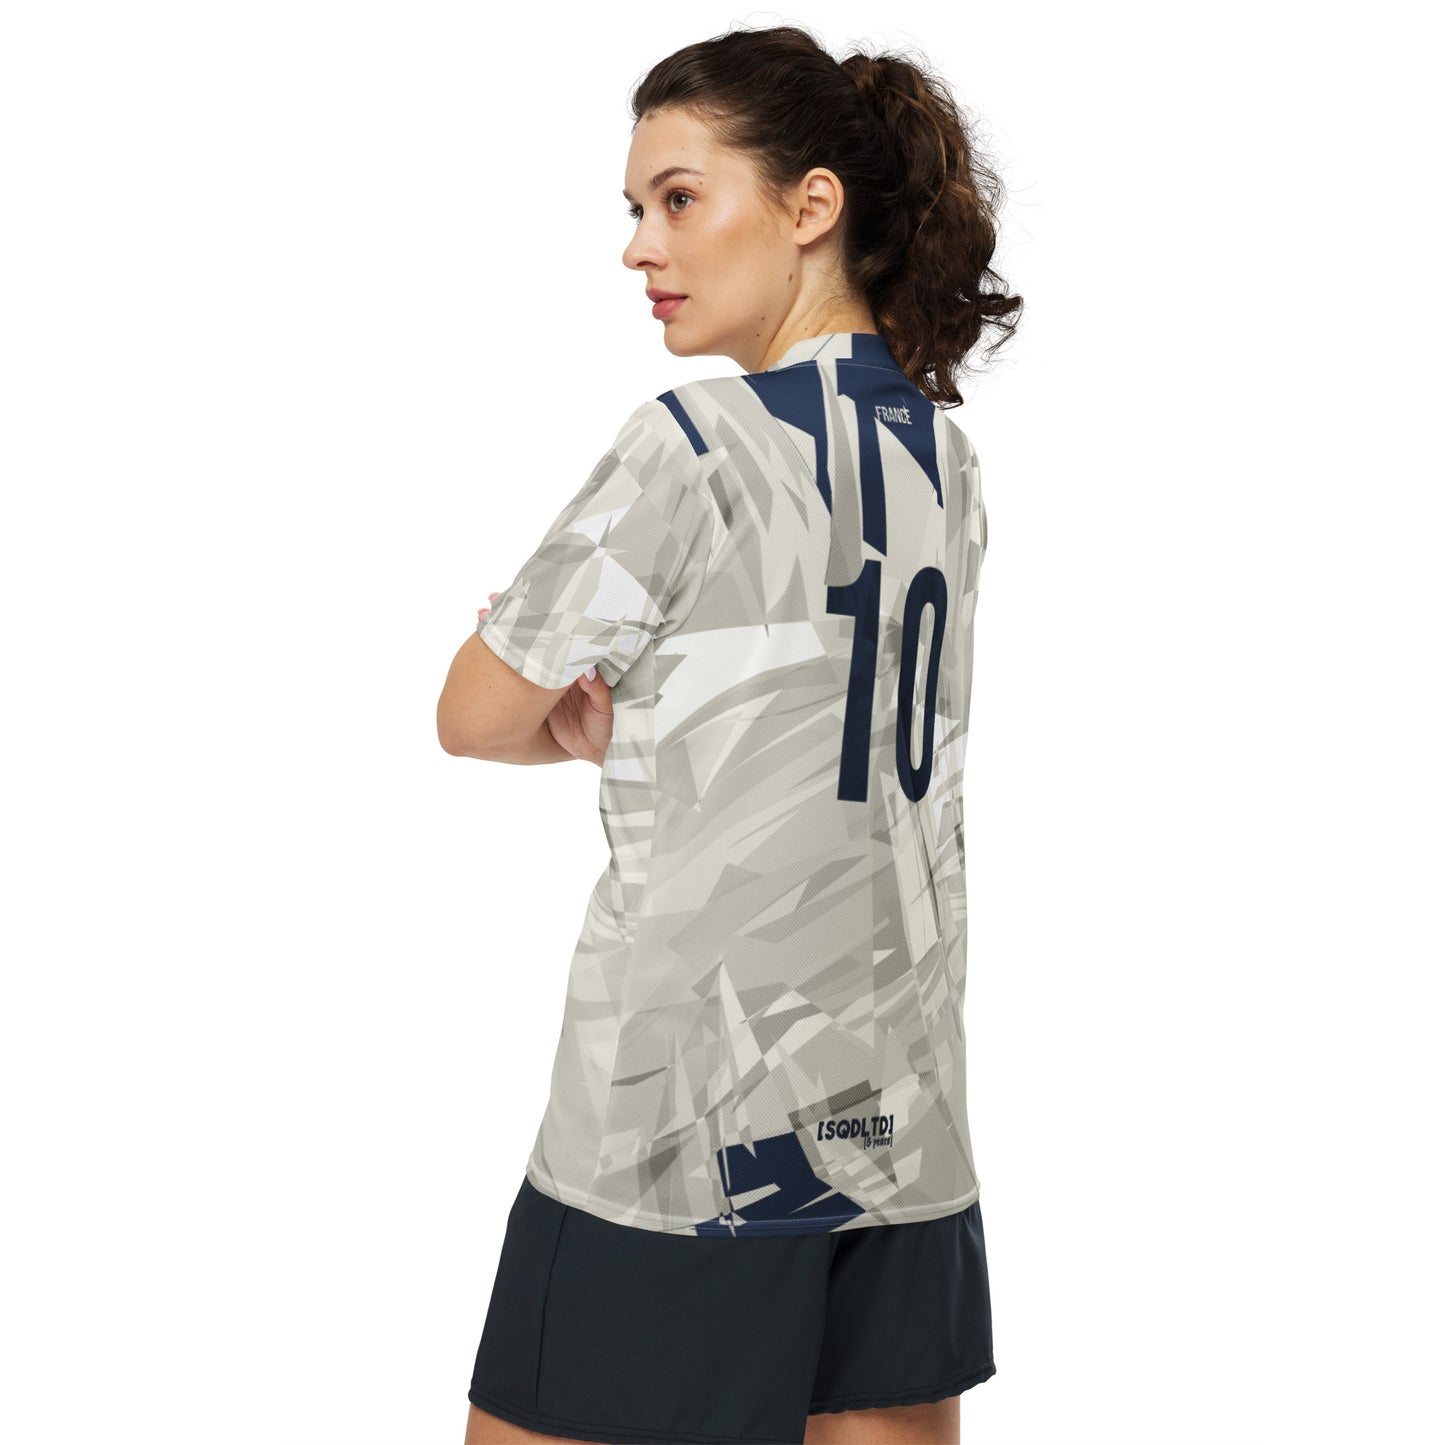 Sqdltd SBWC22 Recycled Unisex Jersey France